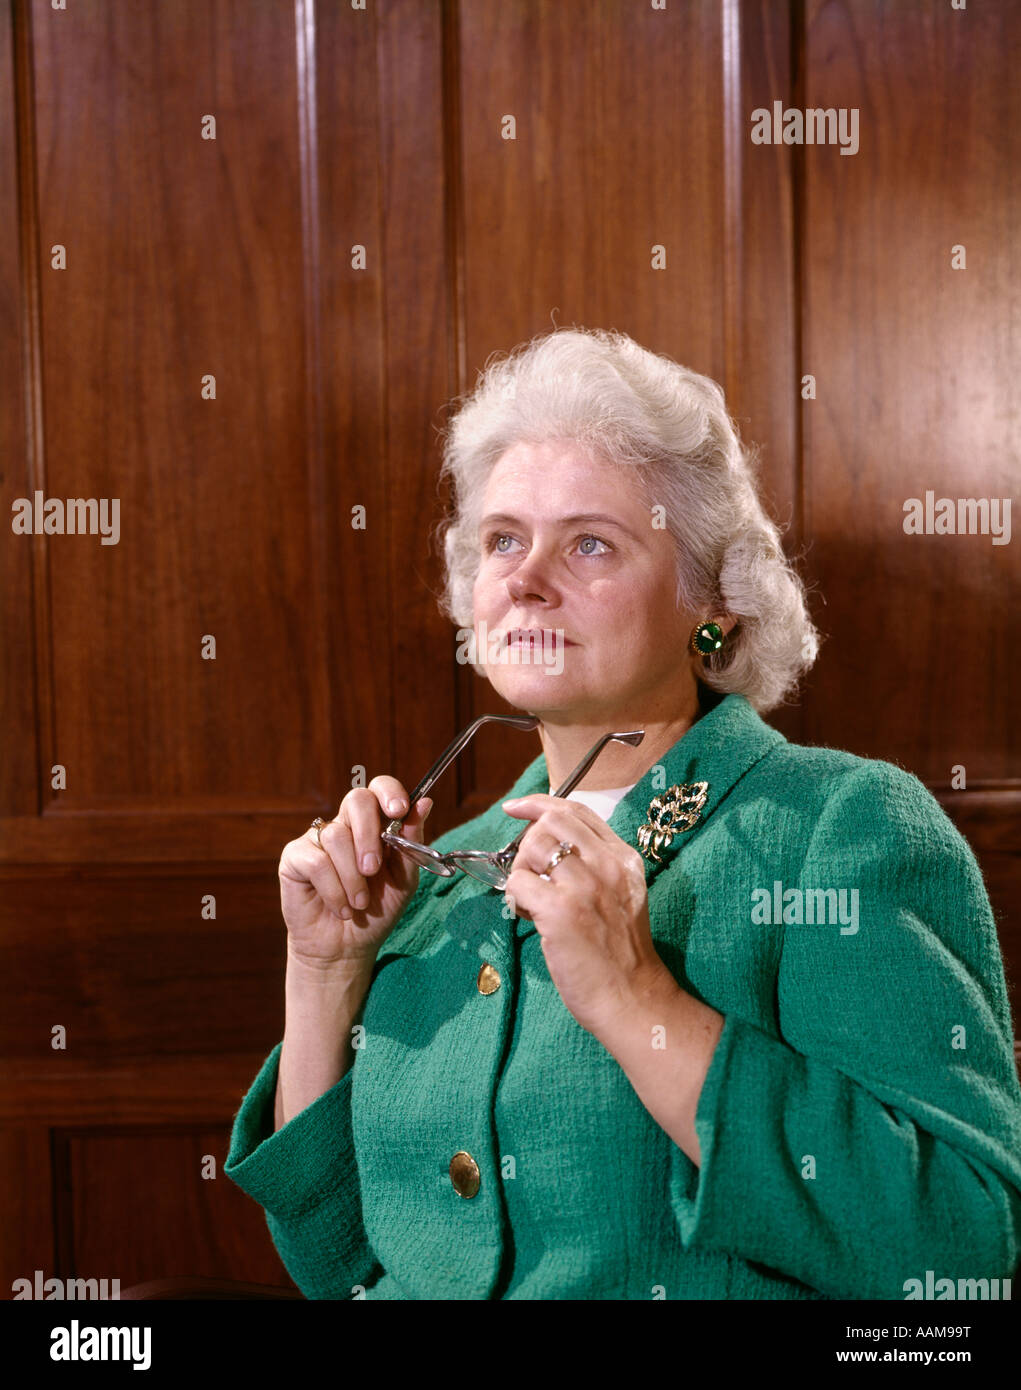 1960s SENIOR ELDERLY WOMAN THOUGHTFUL EXPRESSION SERIOUS HOLDING GLASSES IN HAND LOOK UP WOOD PANEL BACKGROUND Stock Photo